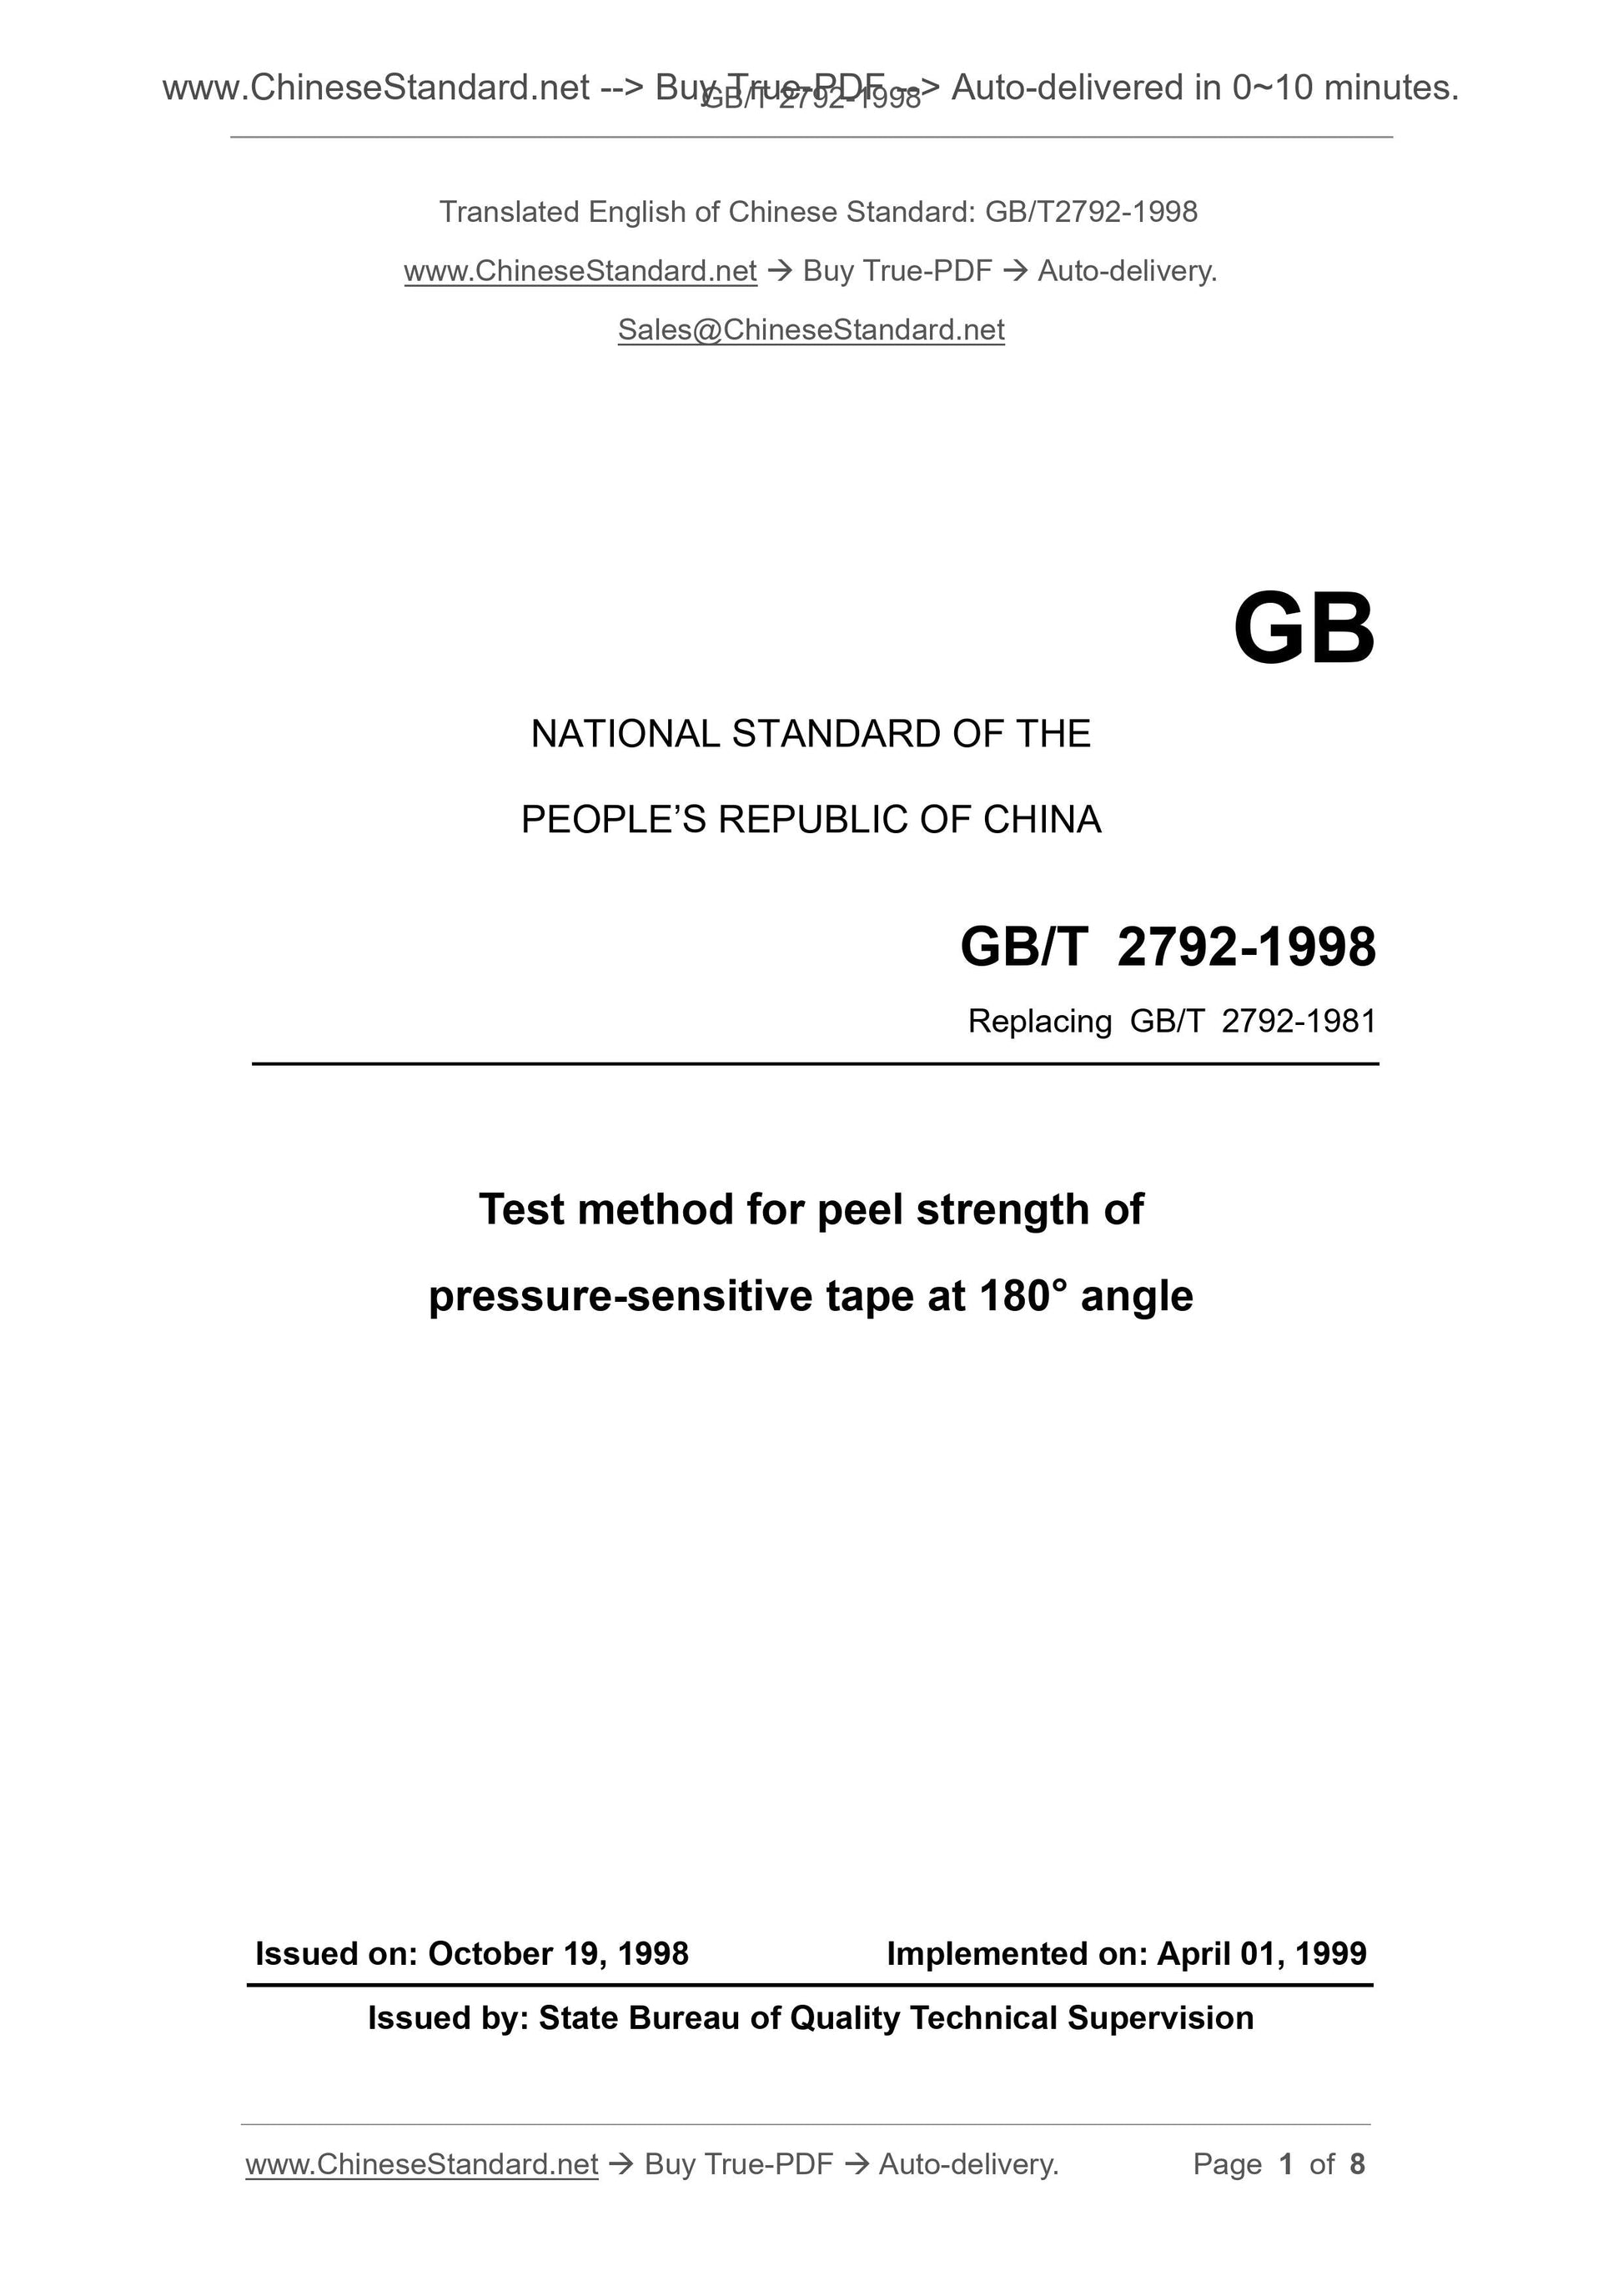 GB/T 2792-1998 Page 1